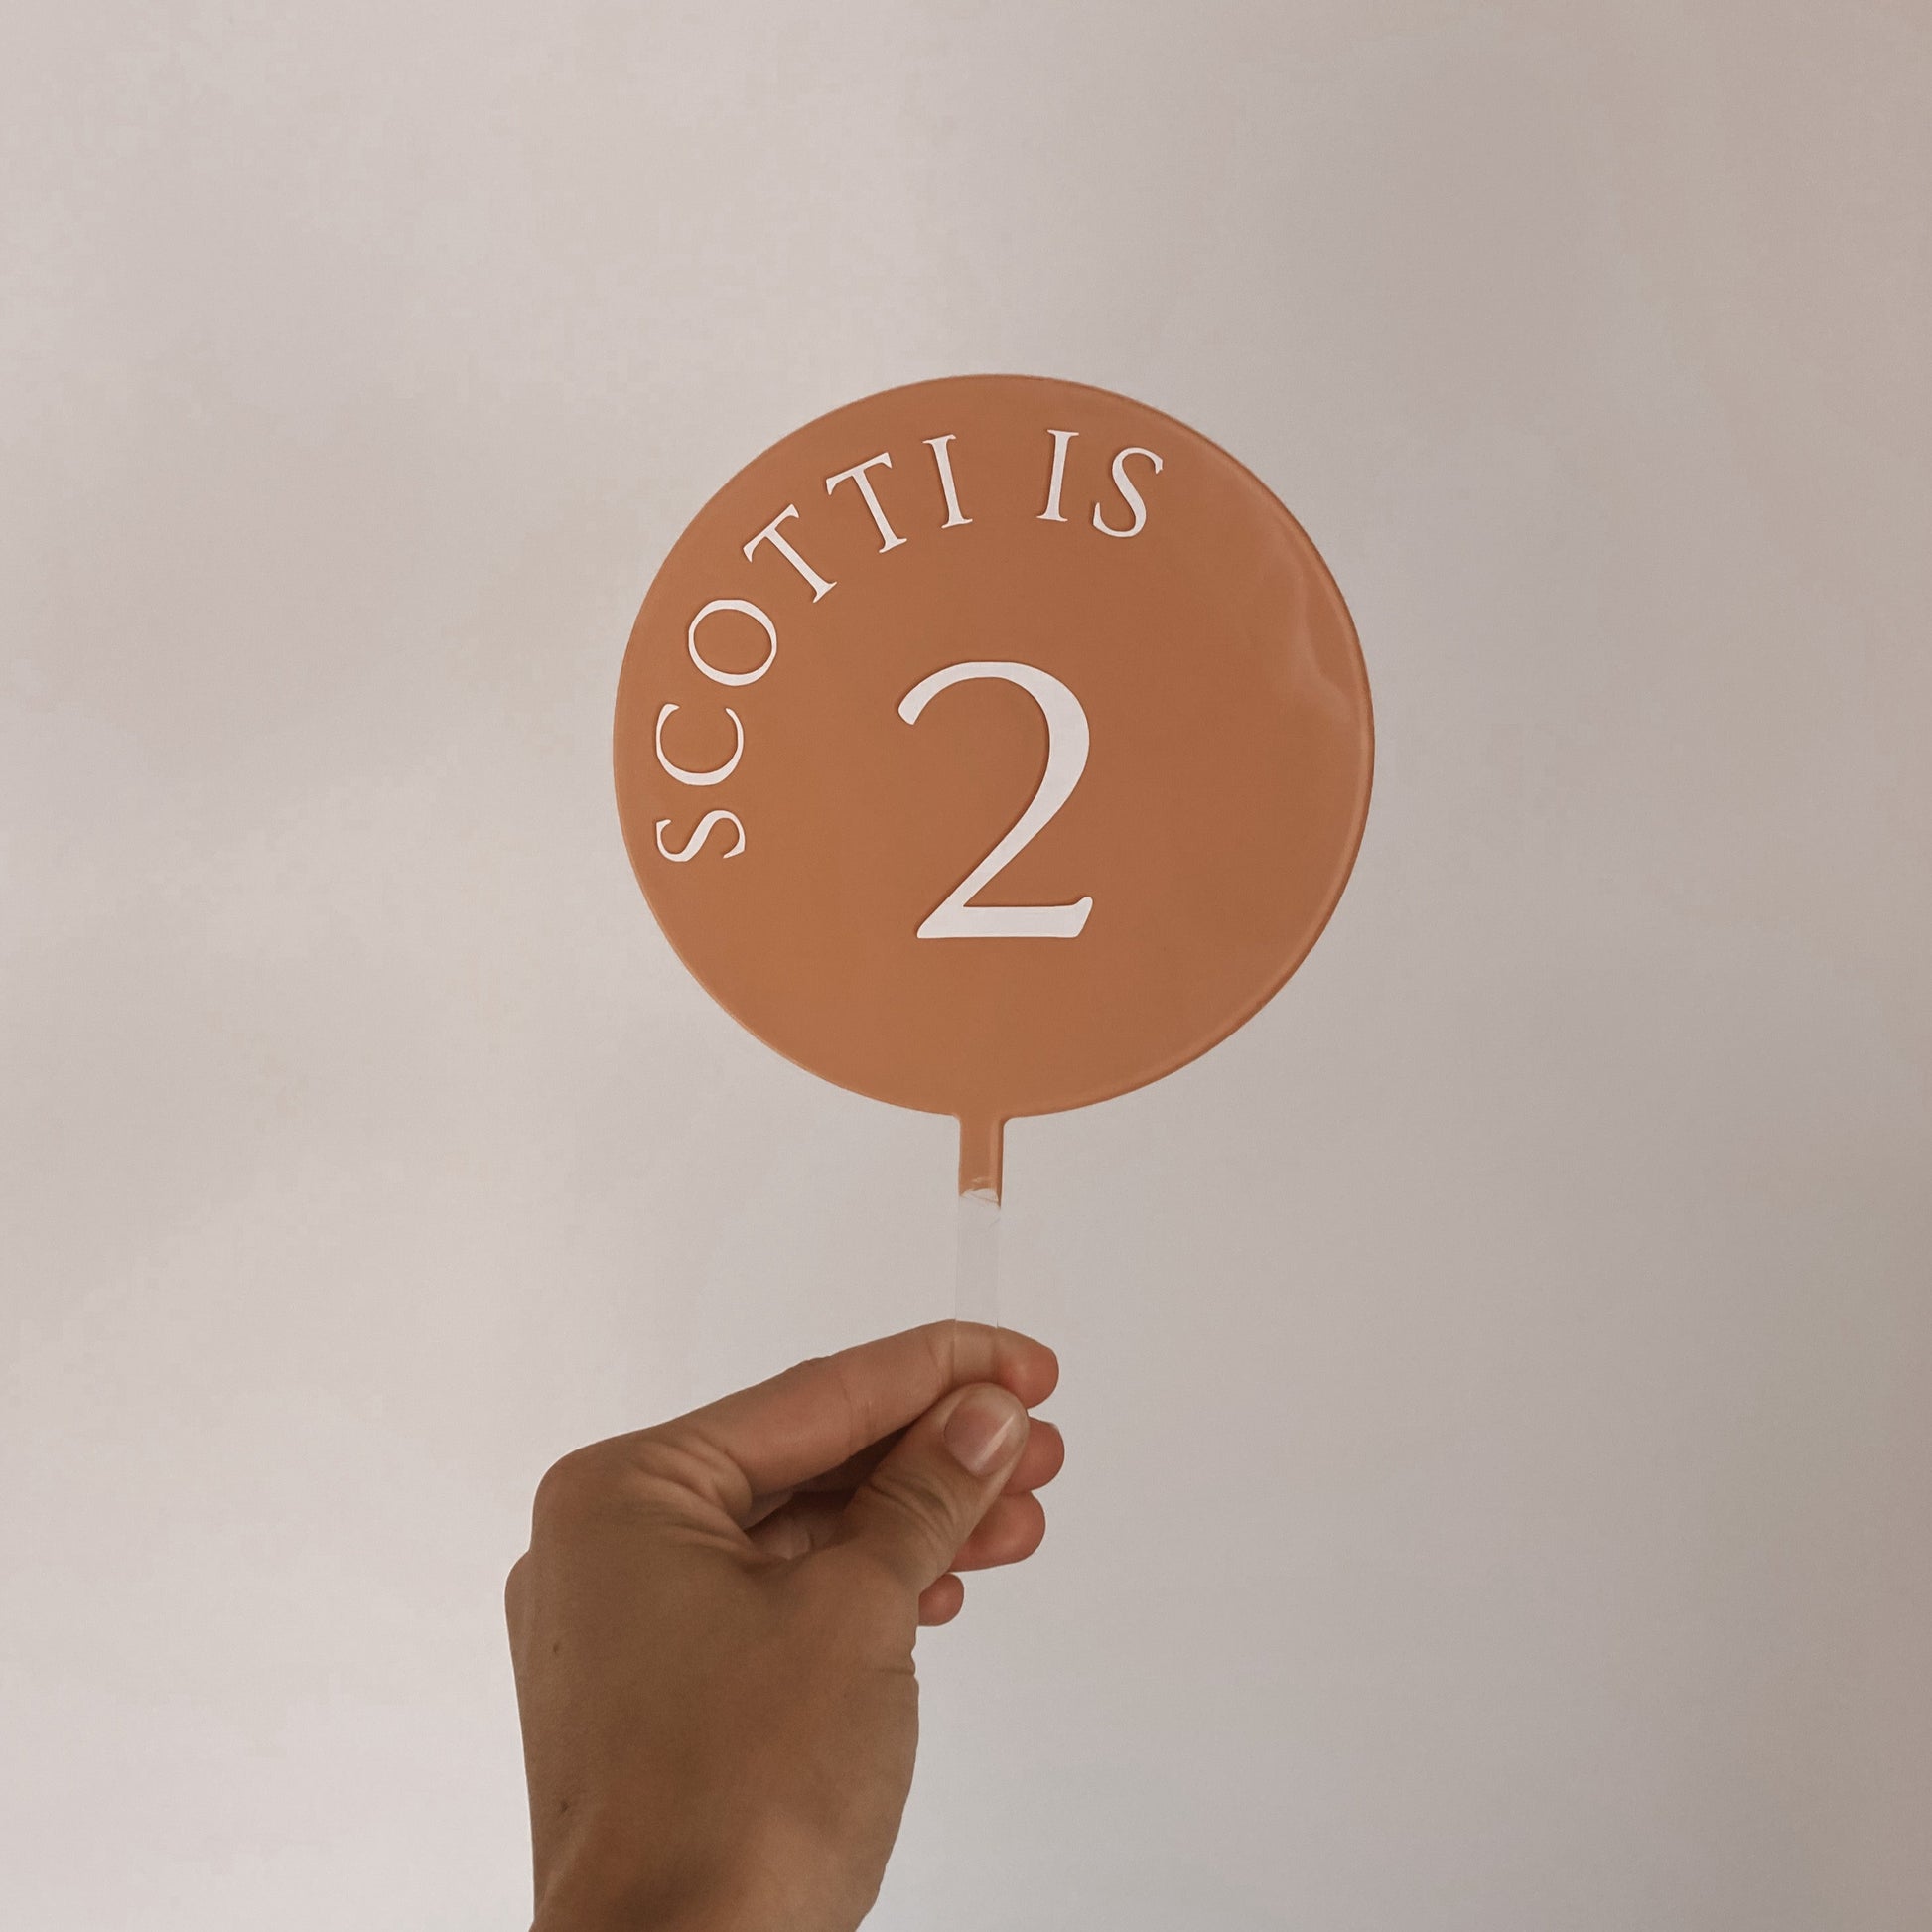 5 inch round cake topper in coral pink, with white print font that says "Scotti is 2"